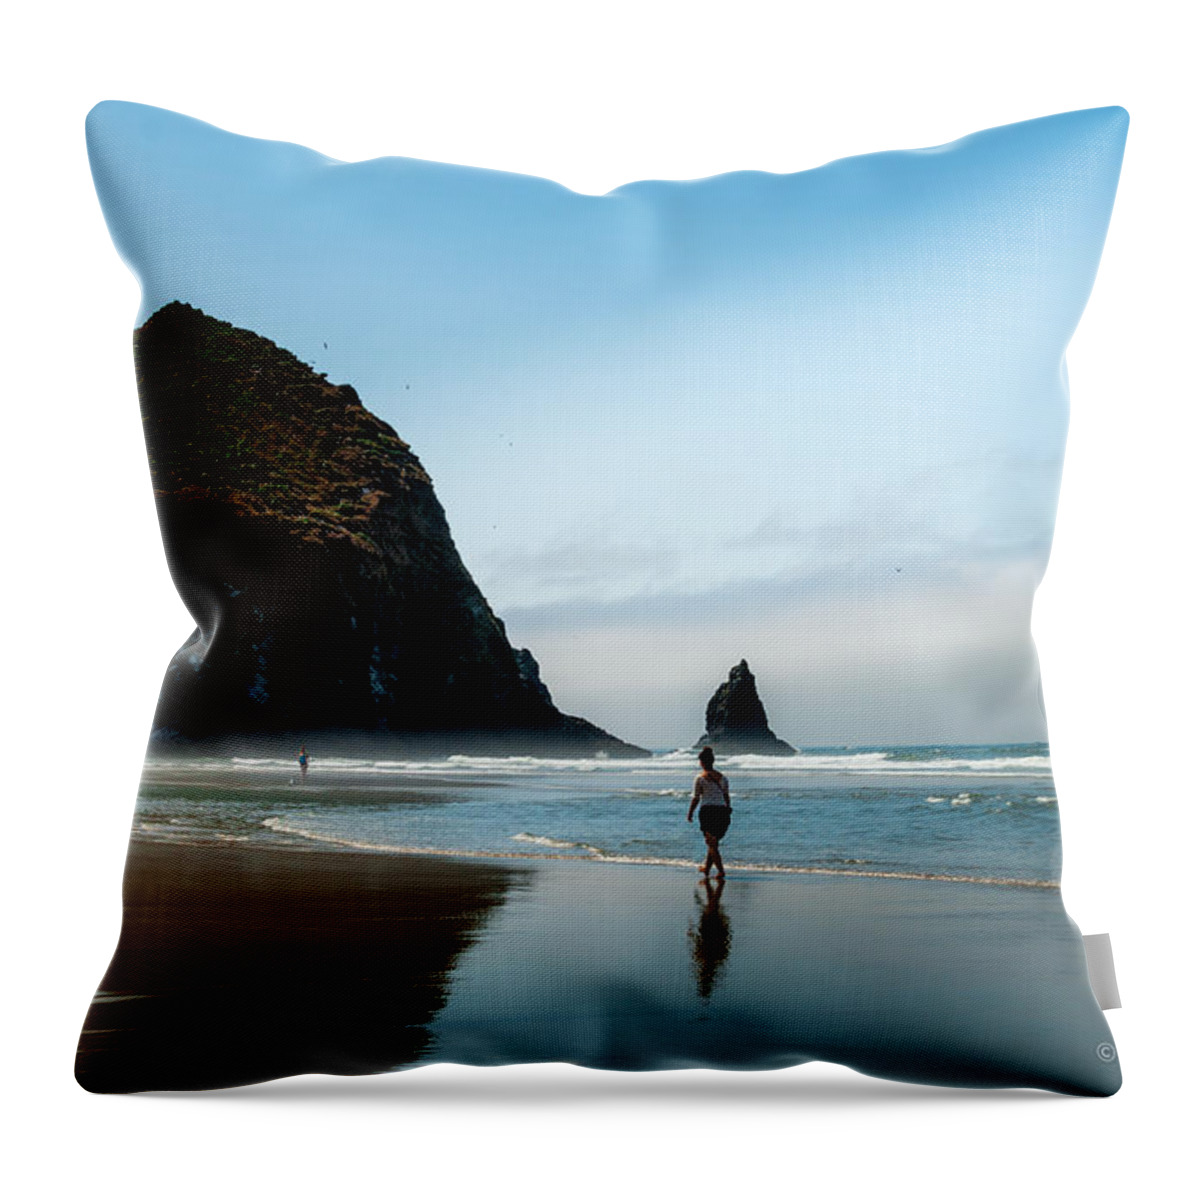 Cannon Beach Oregon Throw Pillow featuring the photograph A Stroll At Cannon Beach Oregon by Cassius Johnson